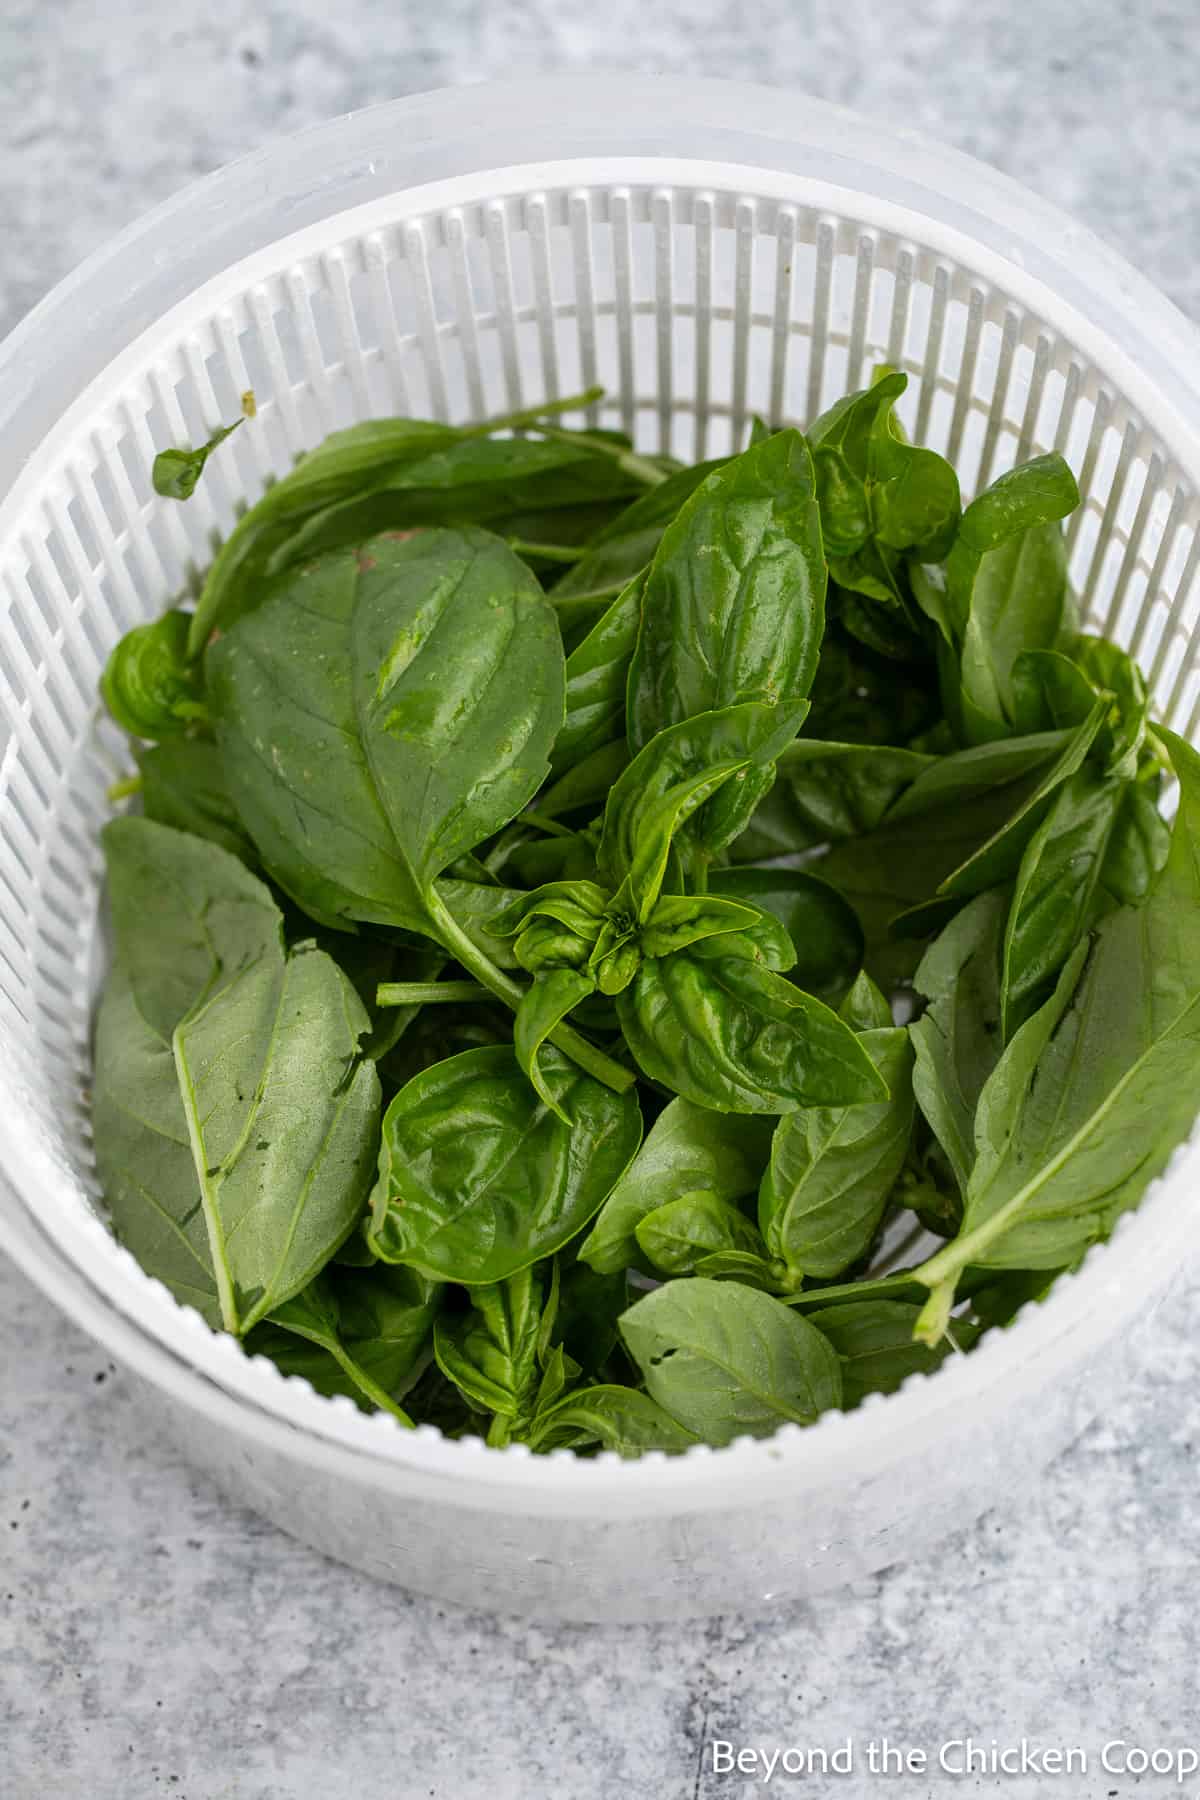 Washing basil in a salad spinner. 